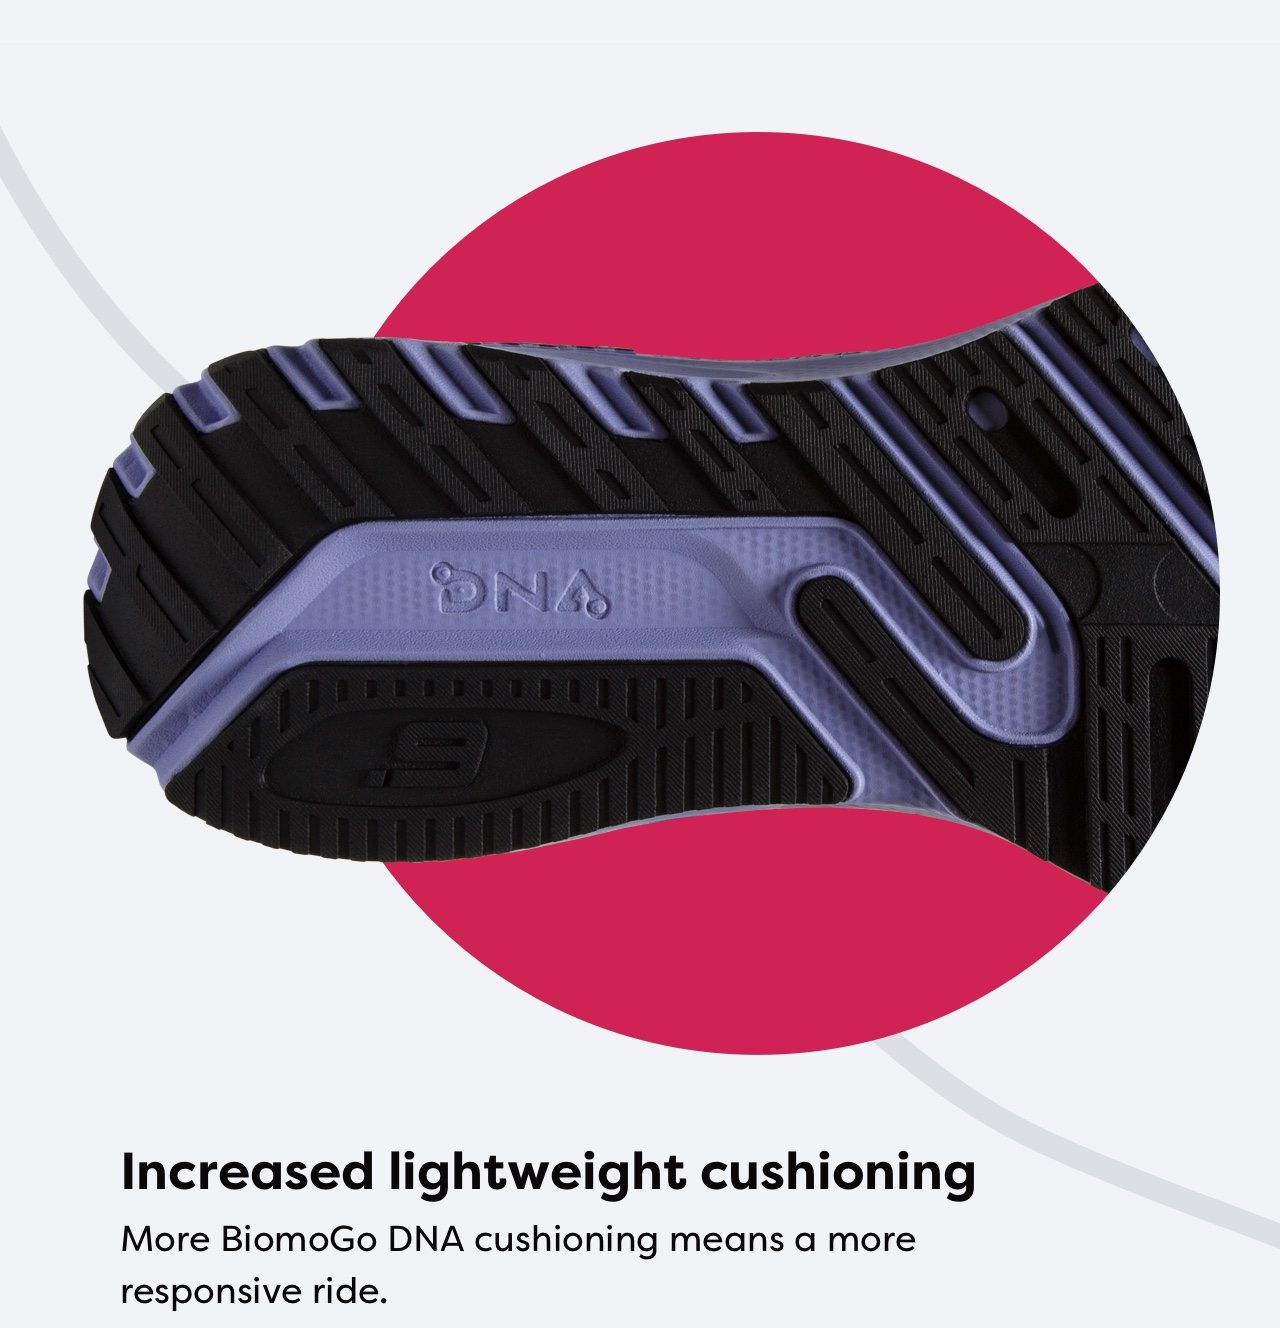 Increased lightweight cushioning | More BiomoGo DNA cushioning means a more responsive ride.